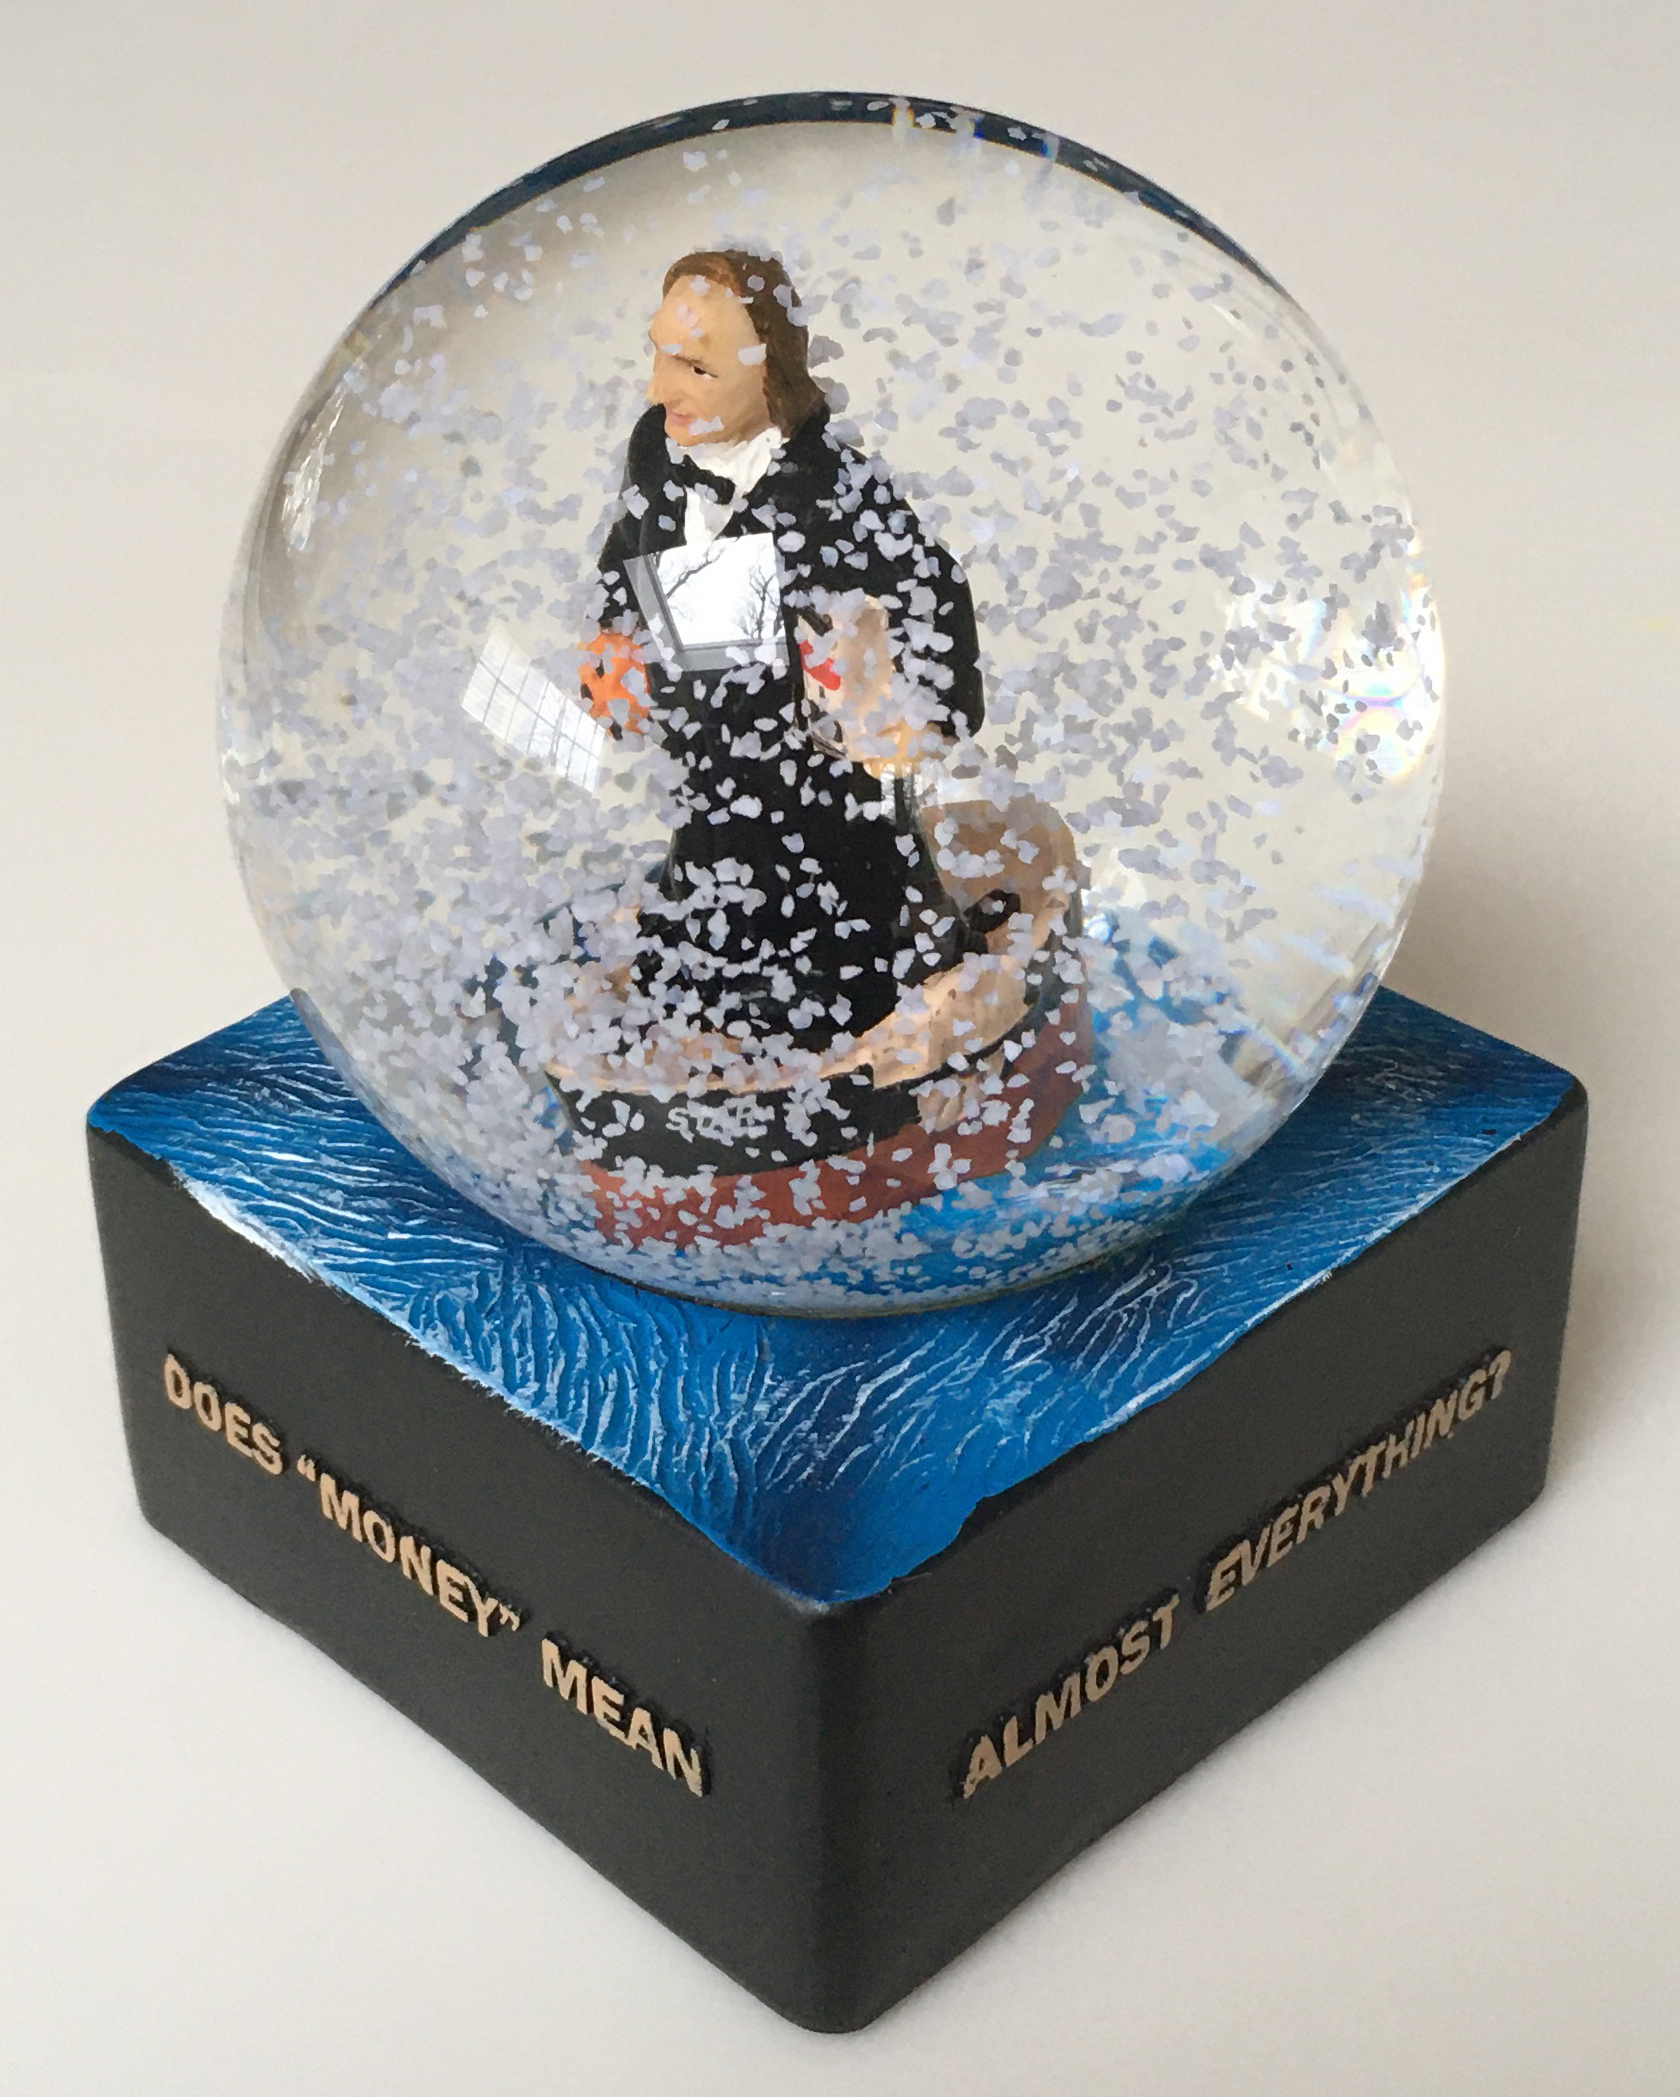 Green Bag snow globe with Justice McLean inside it